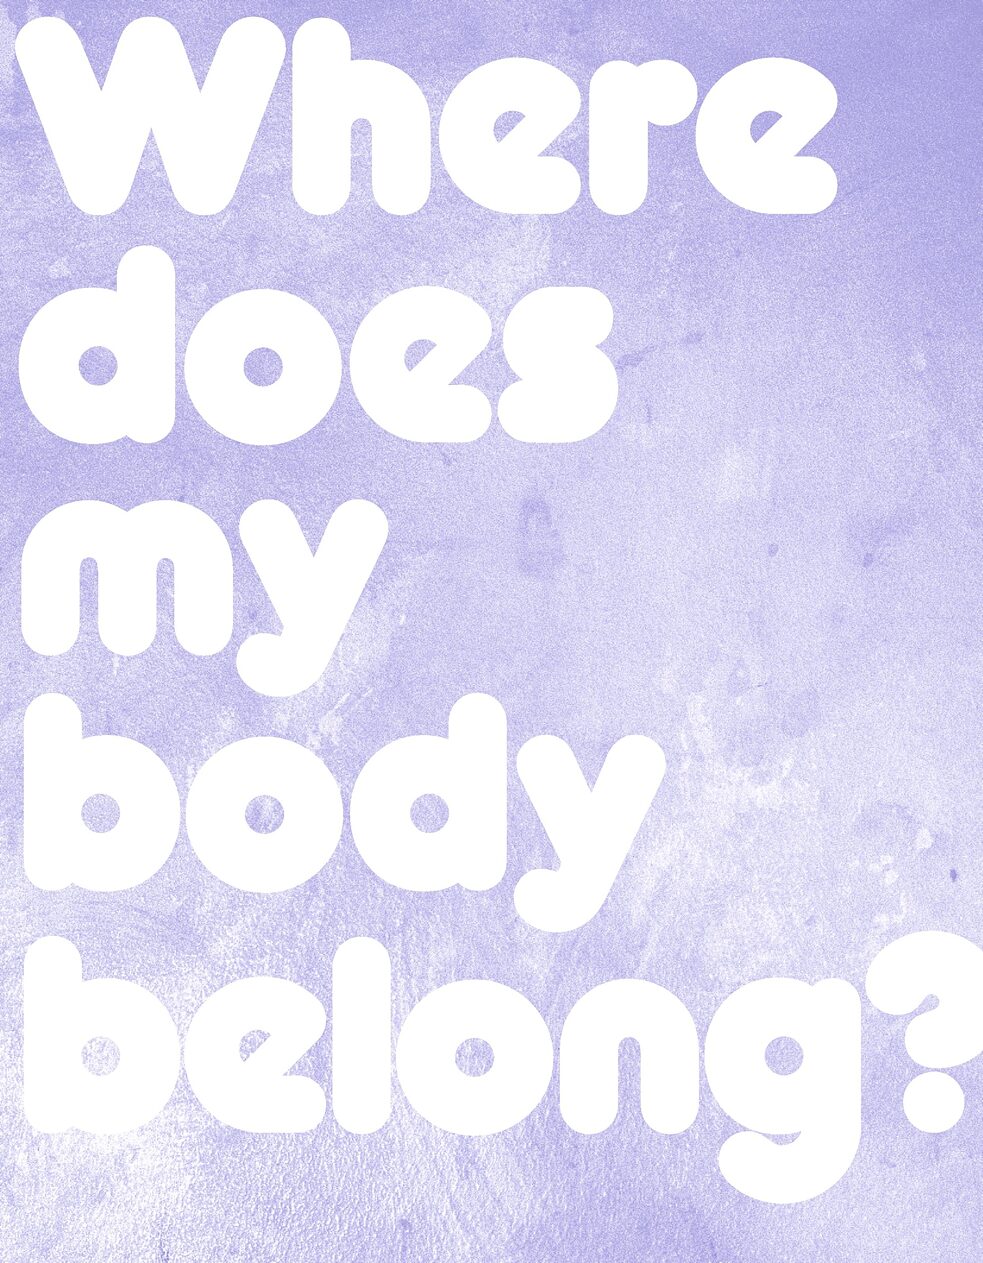 Where does my body belong (Question 3)